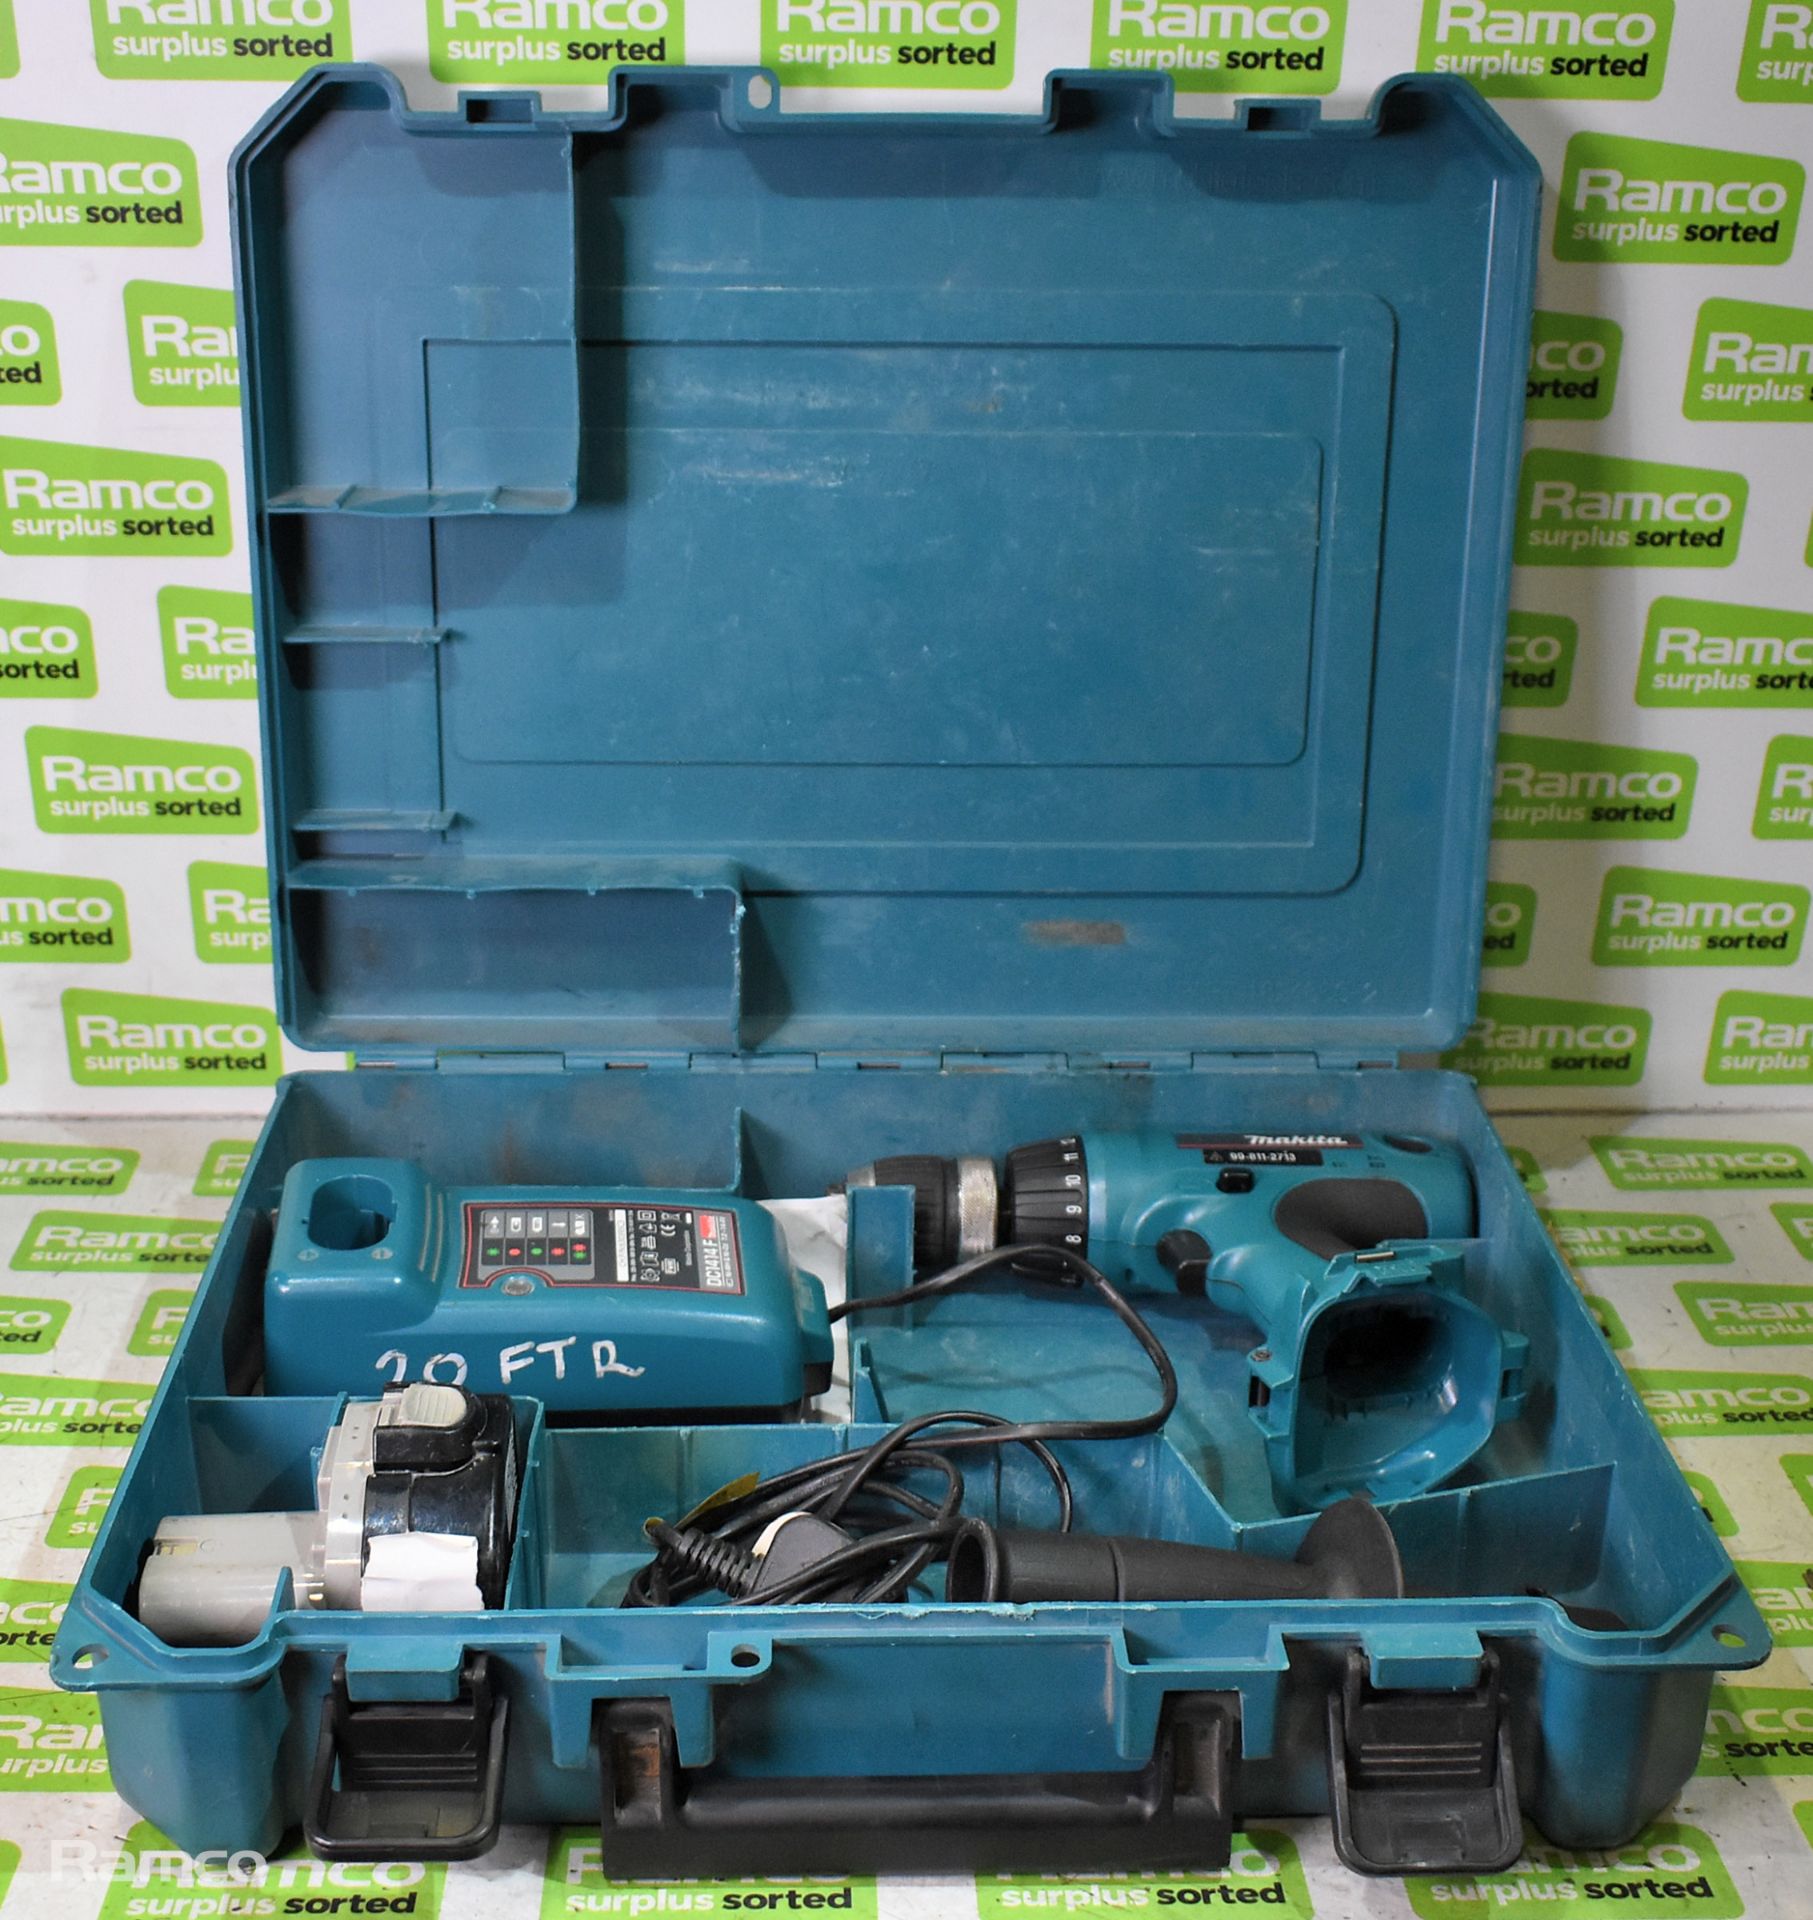 Makita 6317D cordless drill - DC1414F charger - 1x 12V battery - case